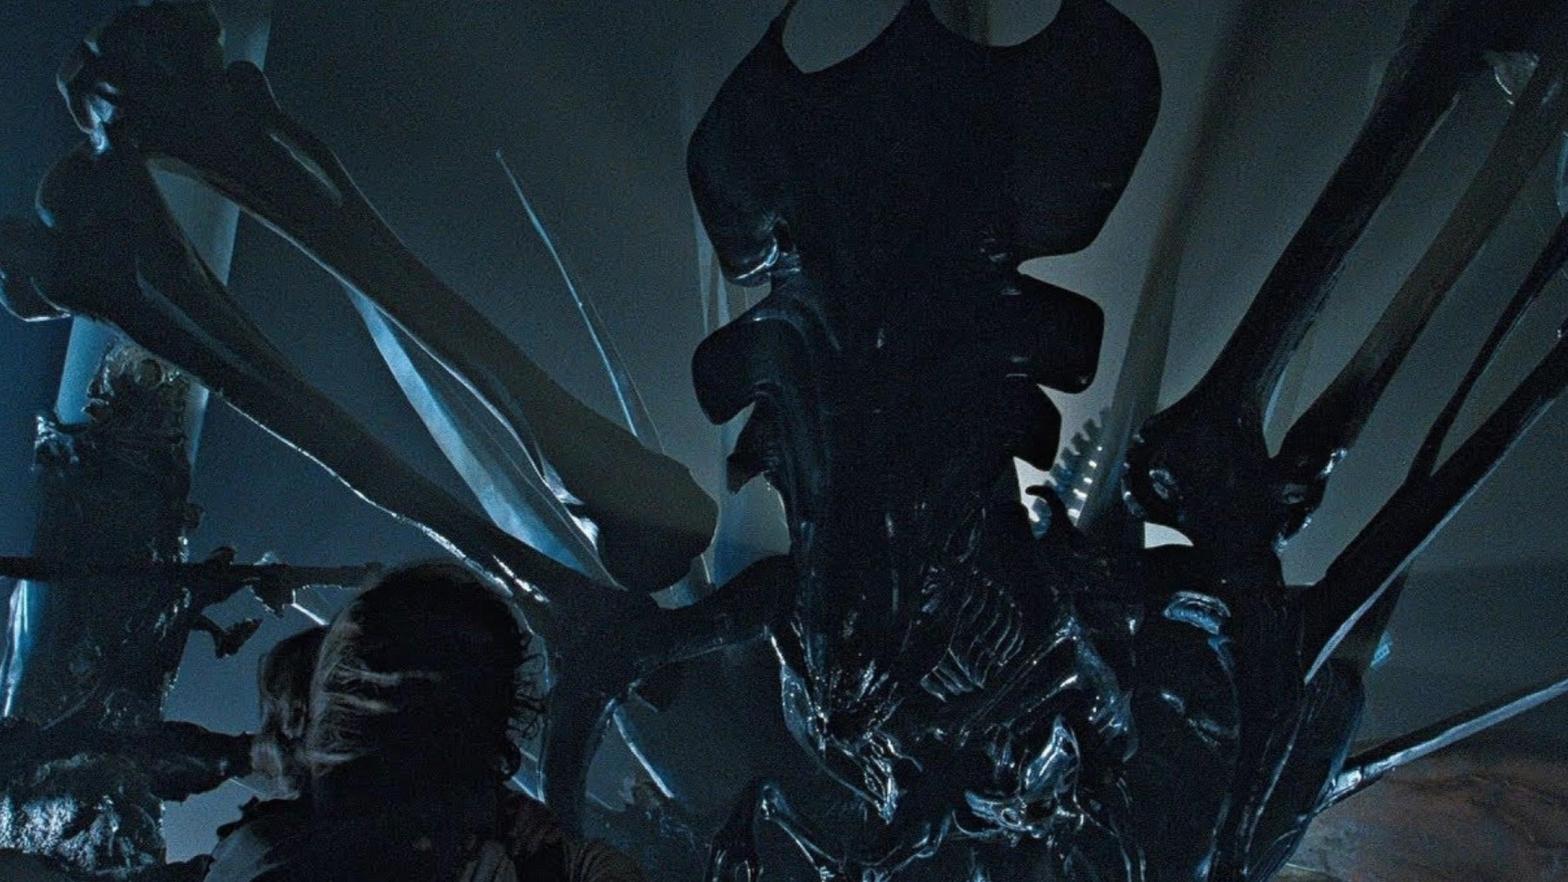 We Finally Know When the New Alien Movie Takes Place